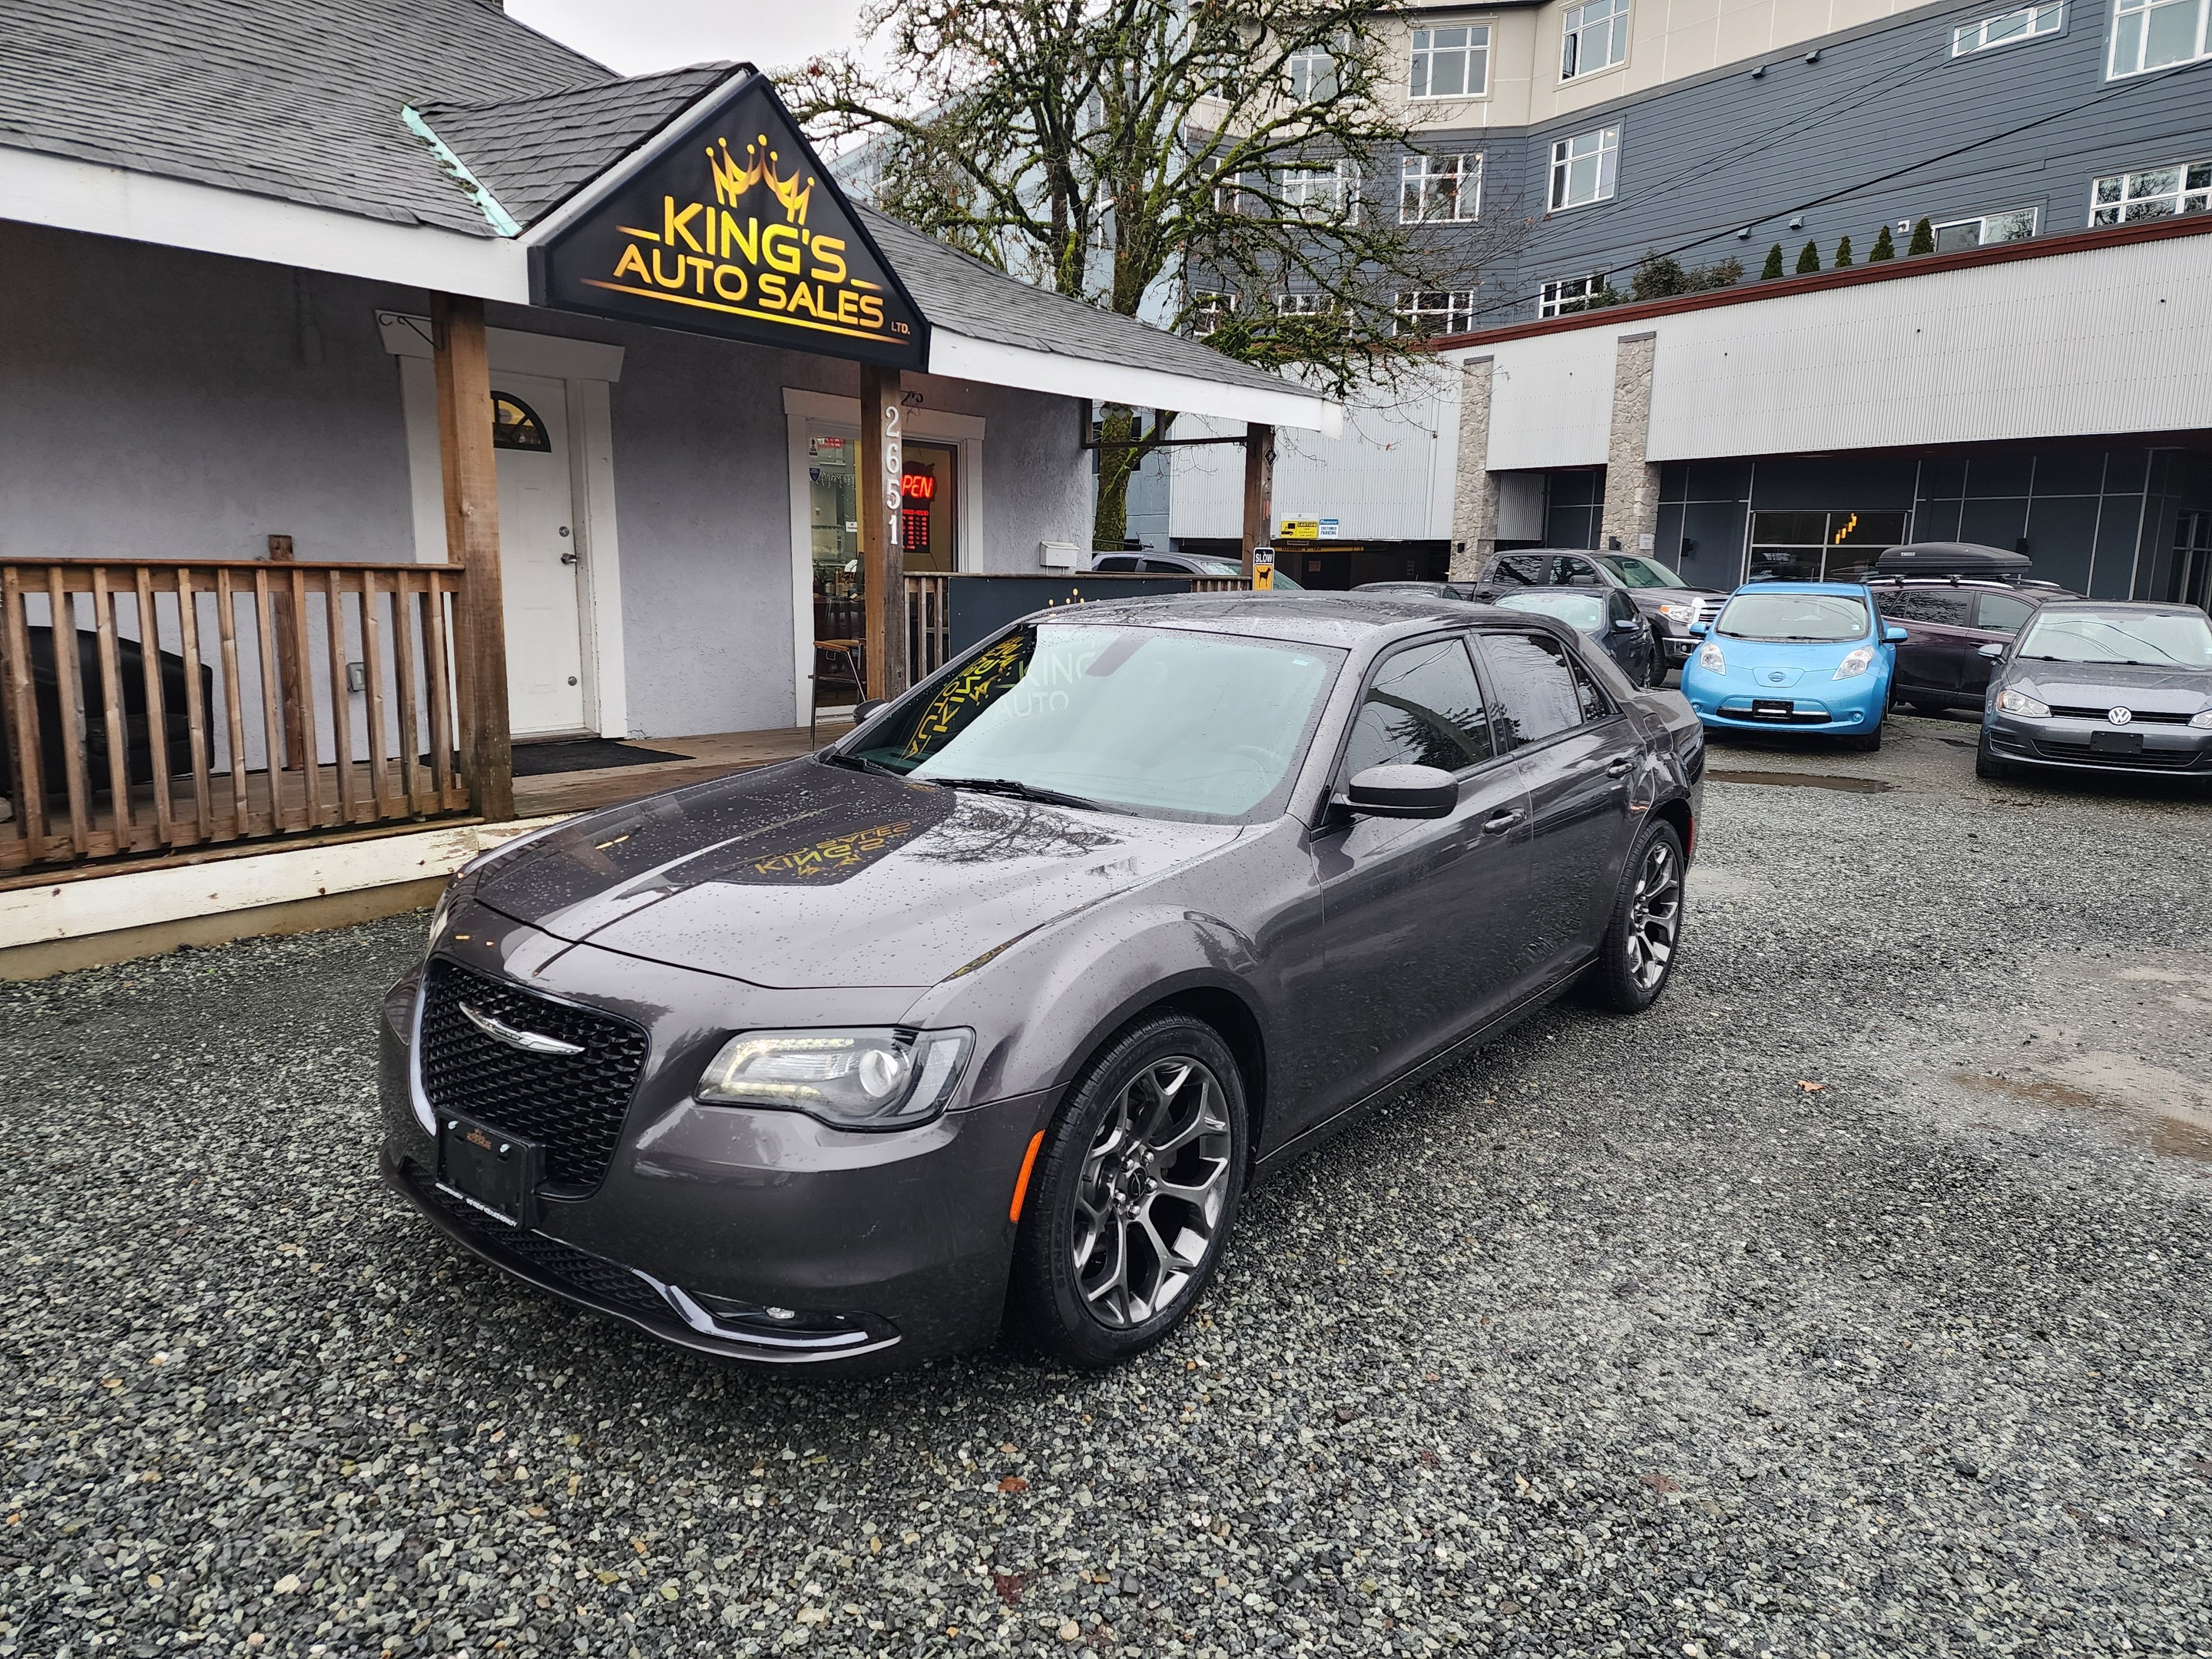 2017 Chrysler 300 4dr Sdn 300S RWD, Leather, Bluetooth, Beats Sound